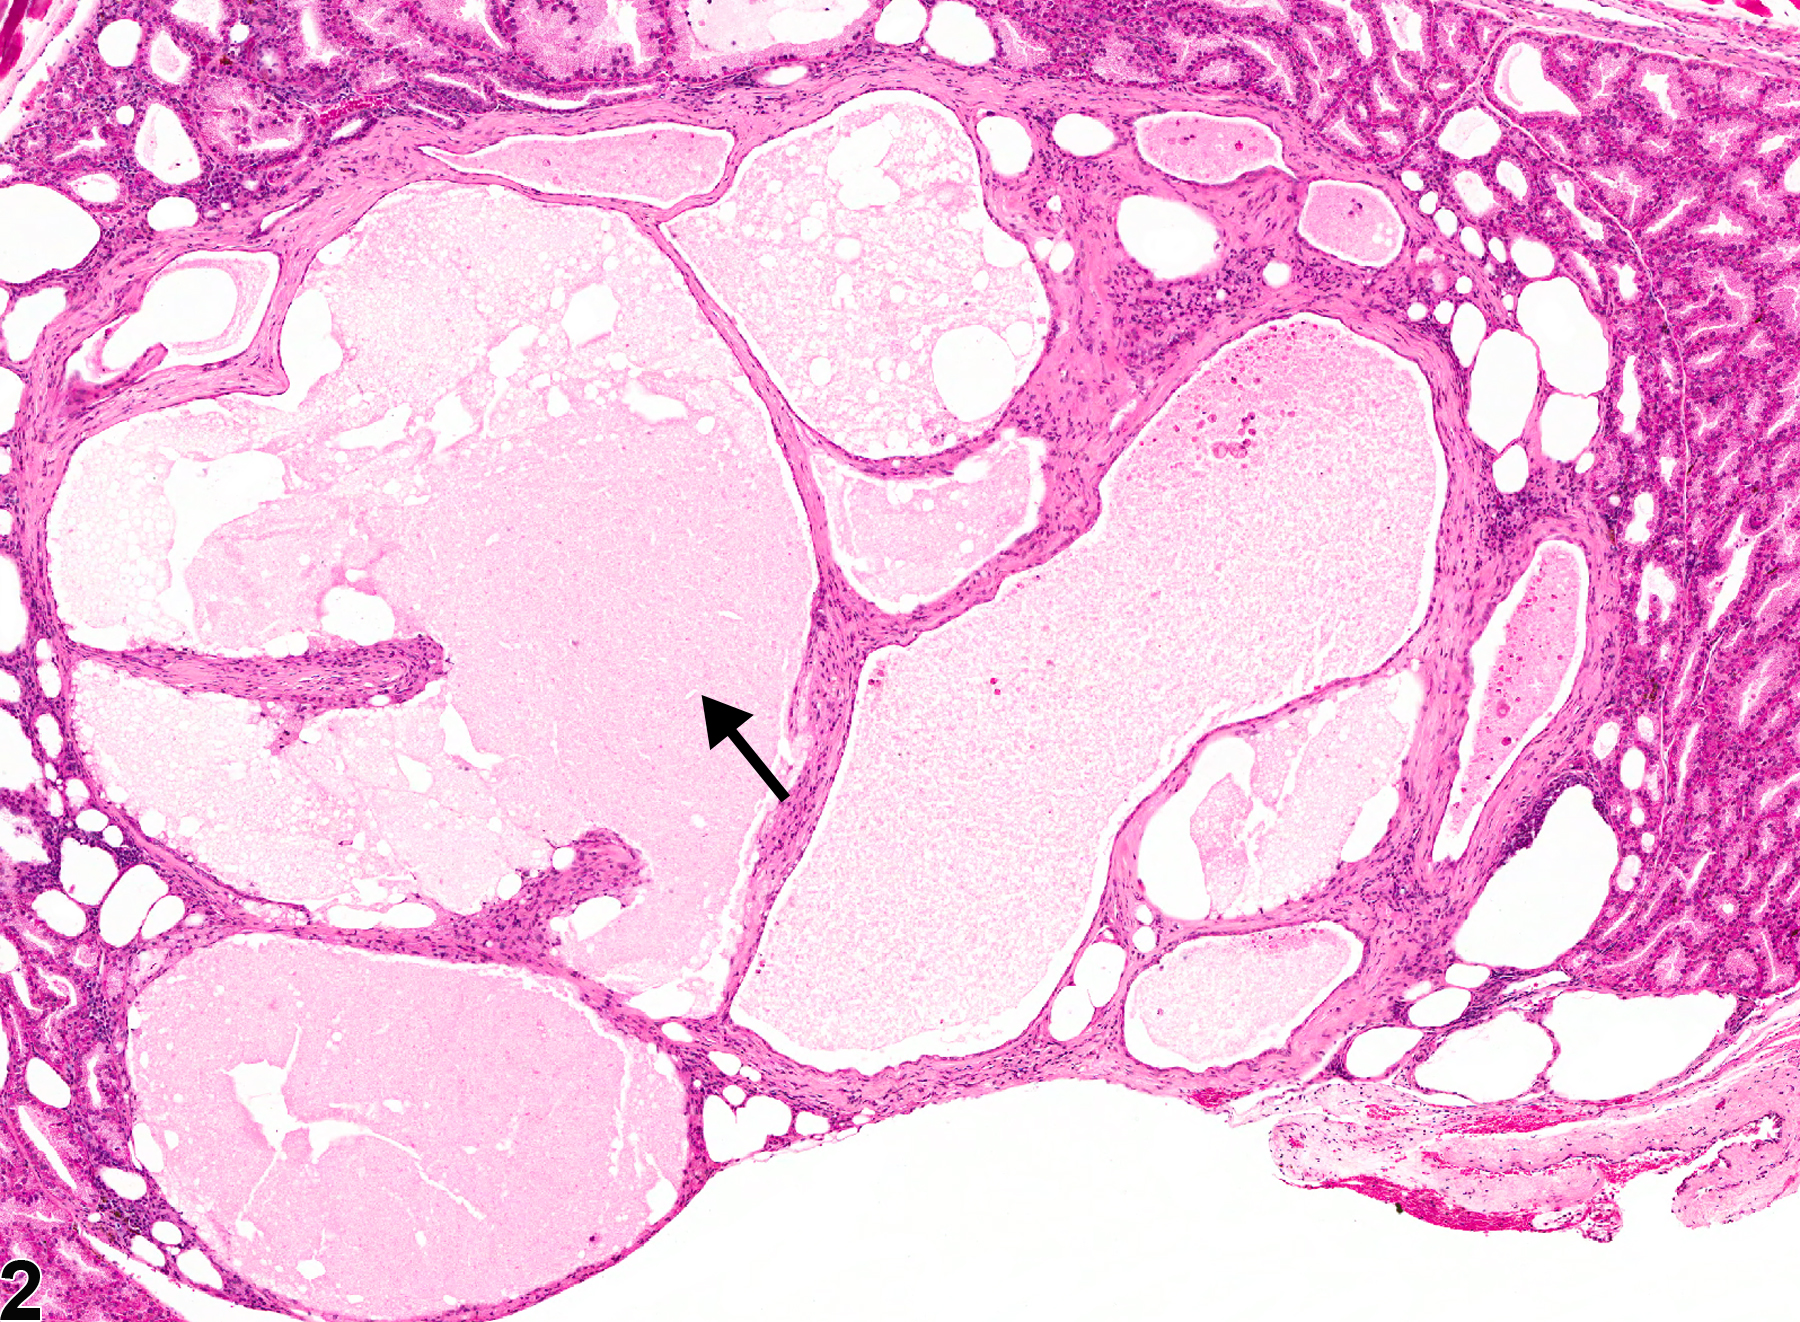 Image of cyst in the Harderian gland from a male B6C3F1 mouse in a chronic study